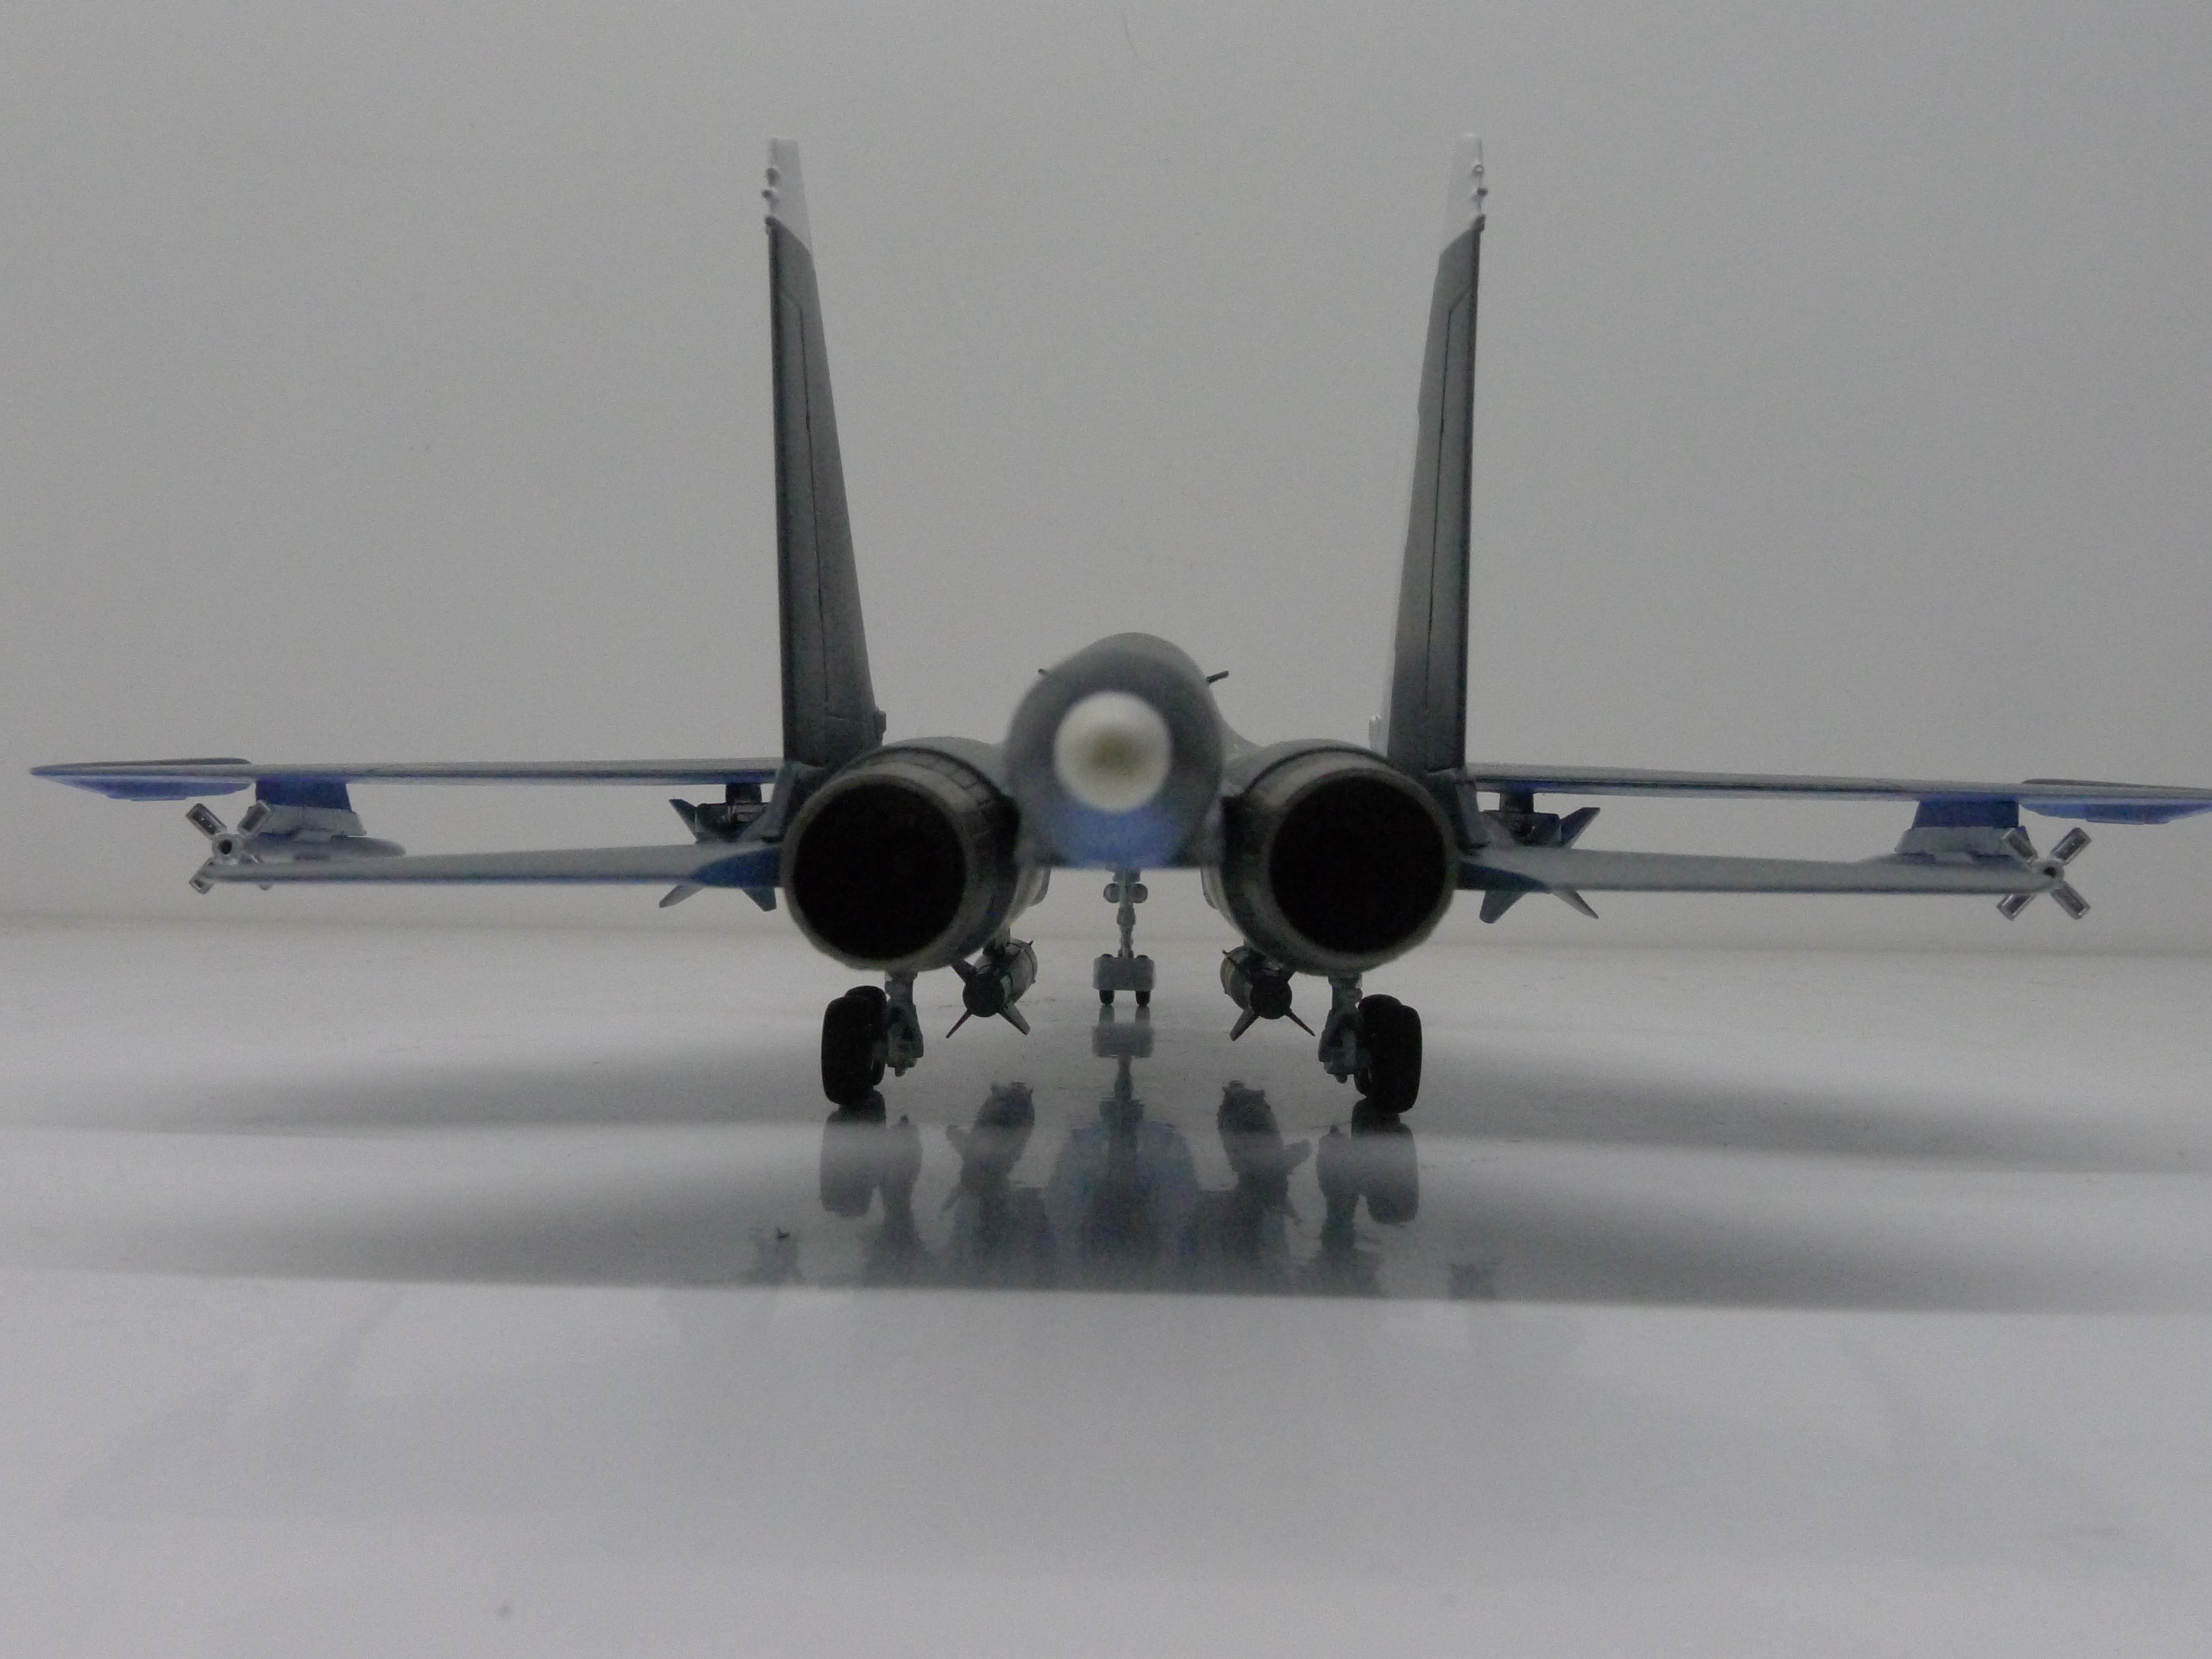        -34  1:72,   28 . ,  .  Model Russian front-line aircraft, the Su-34. Scale 1:72, hand made. # 10 hobbyplus.ru